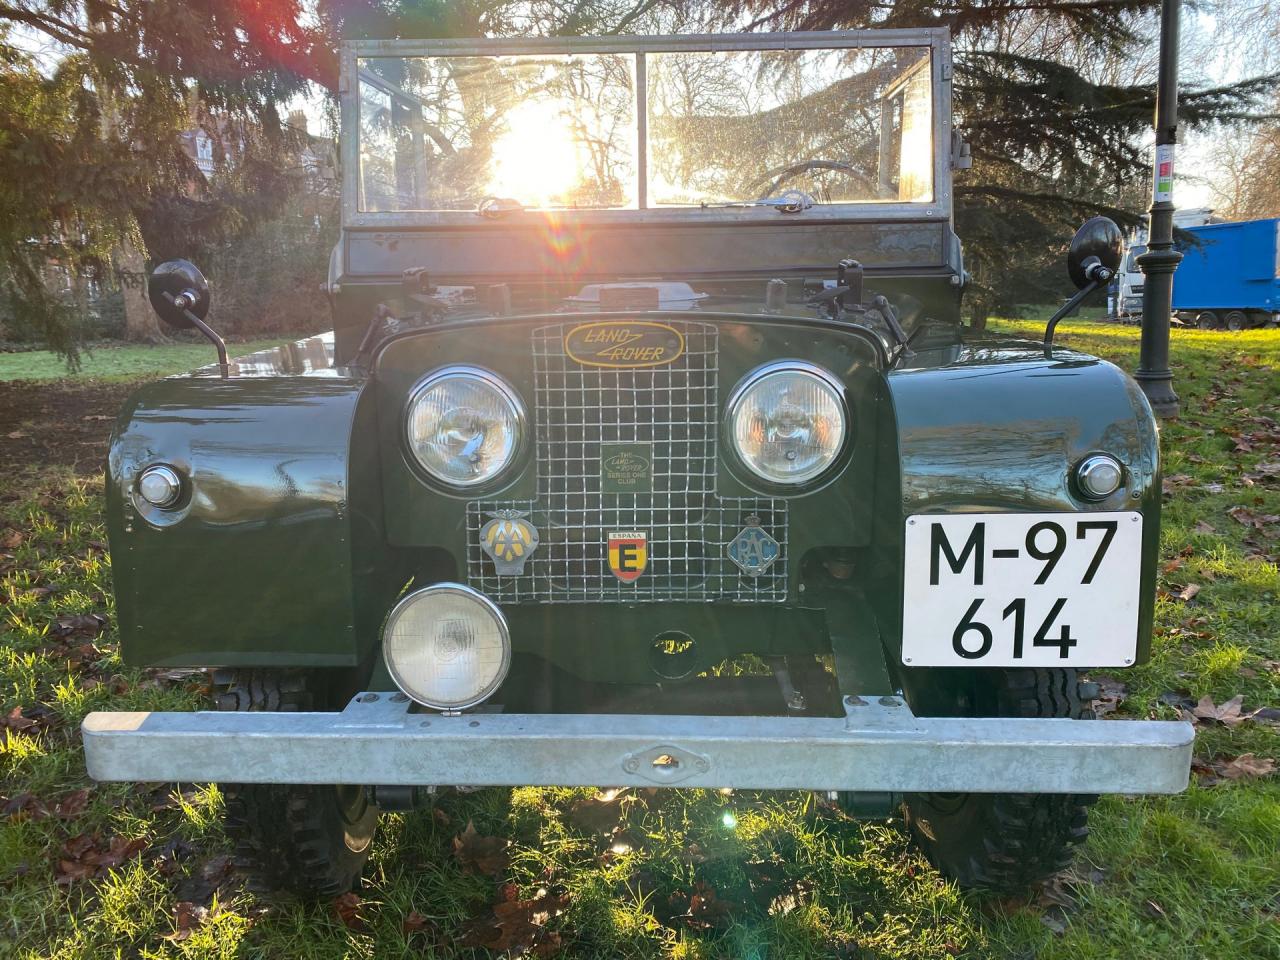 1952 Land Rover Series I